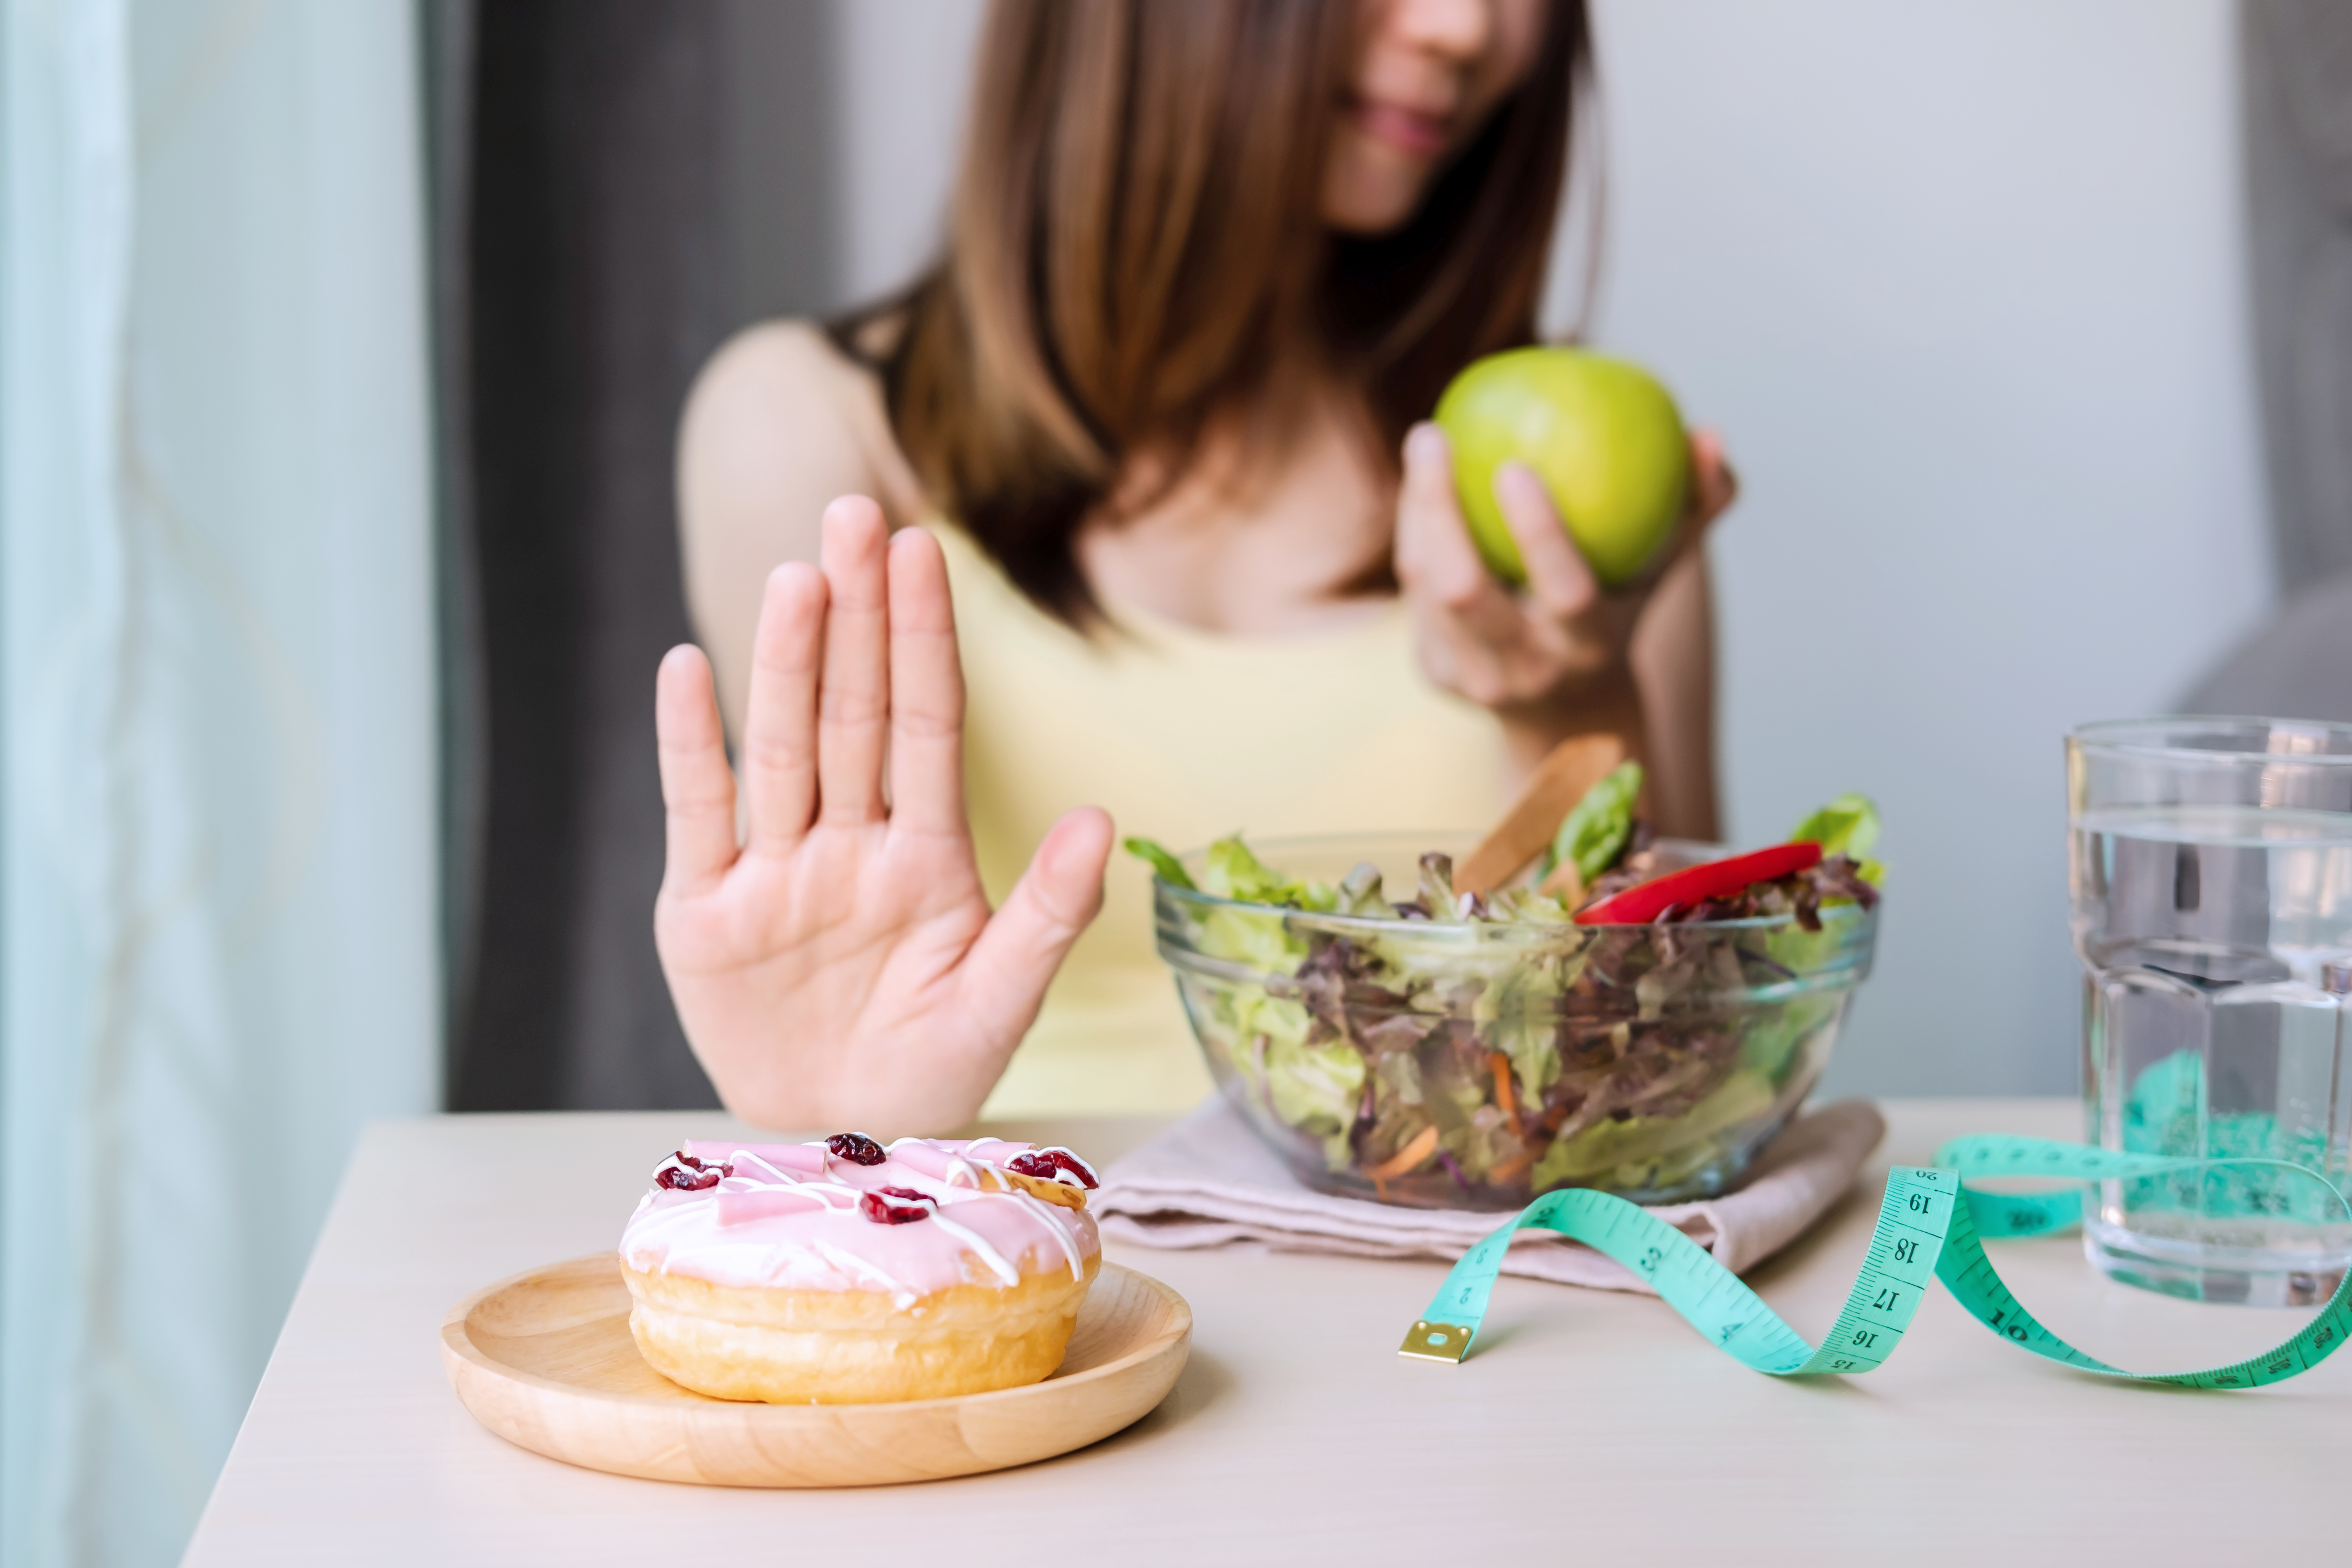 Young healthy woman using hand push out dessert and sweets and choose green apple and fresh salad, healthy lifestyle and diet concept